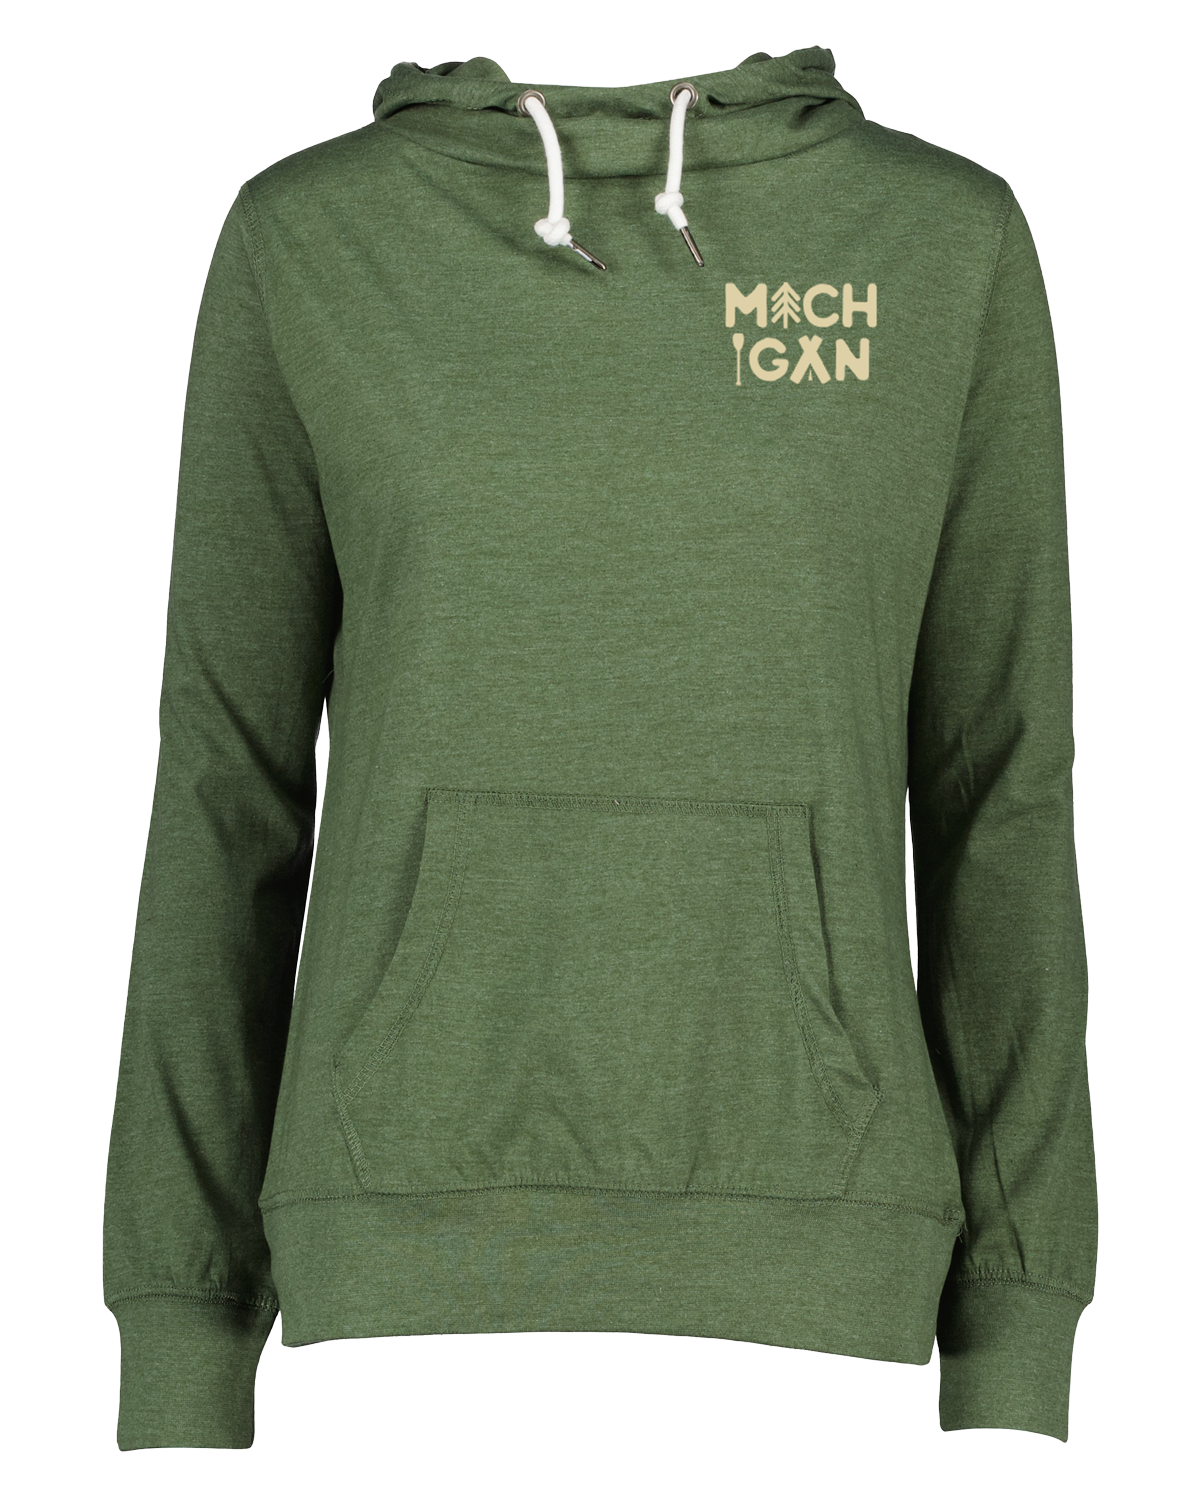 Women's Michigan Outdoors Funnel Neck Hooded Long Sleeve